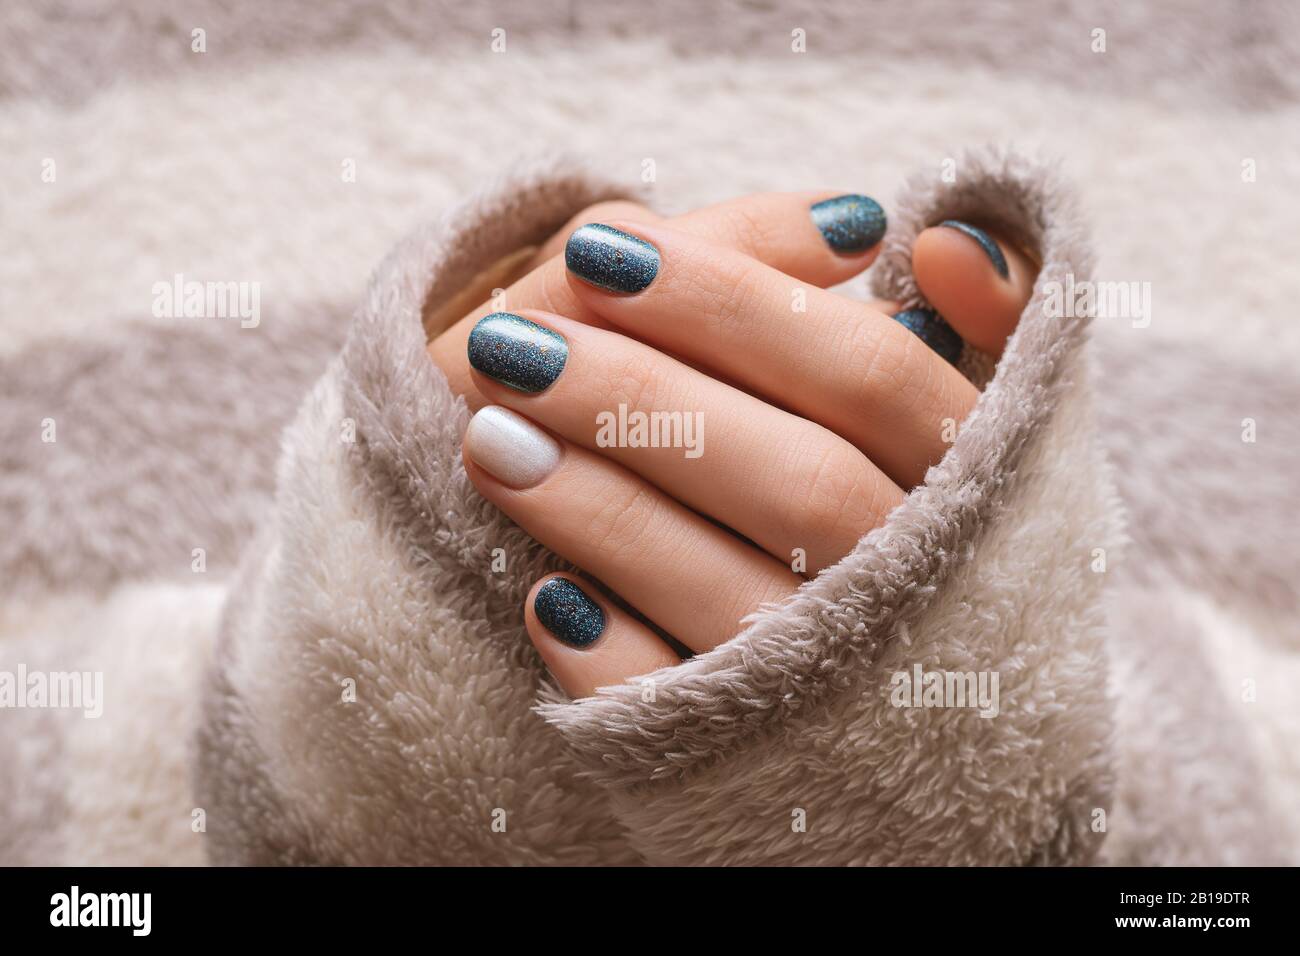 Female hands with blue glitter nail design Stock Photo